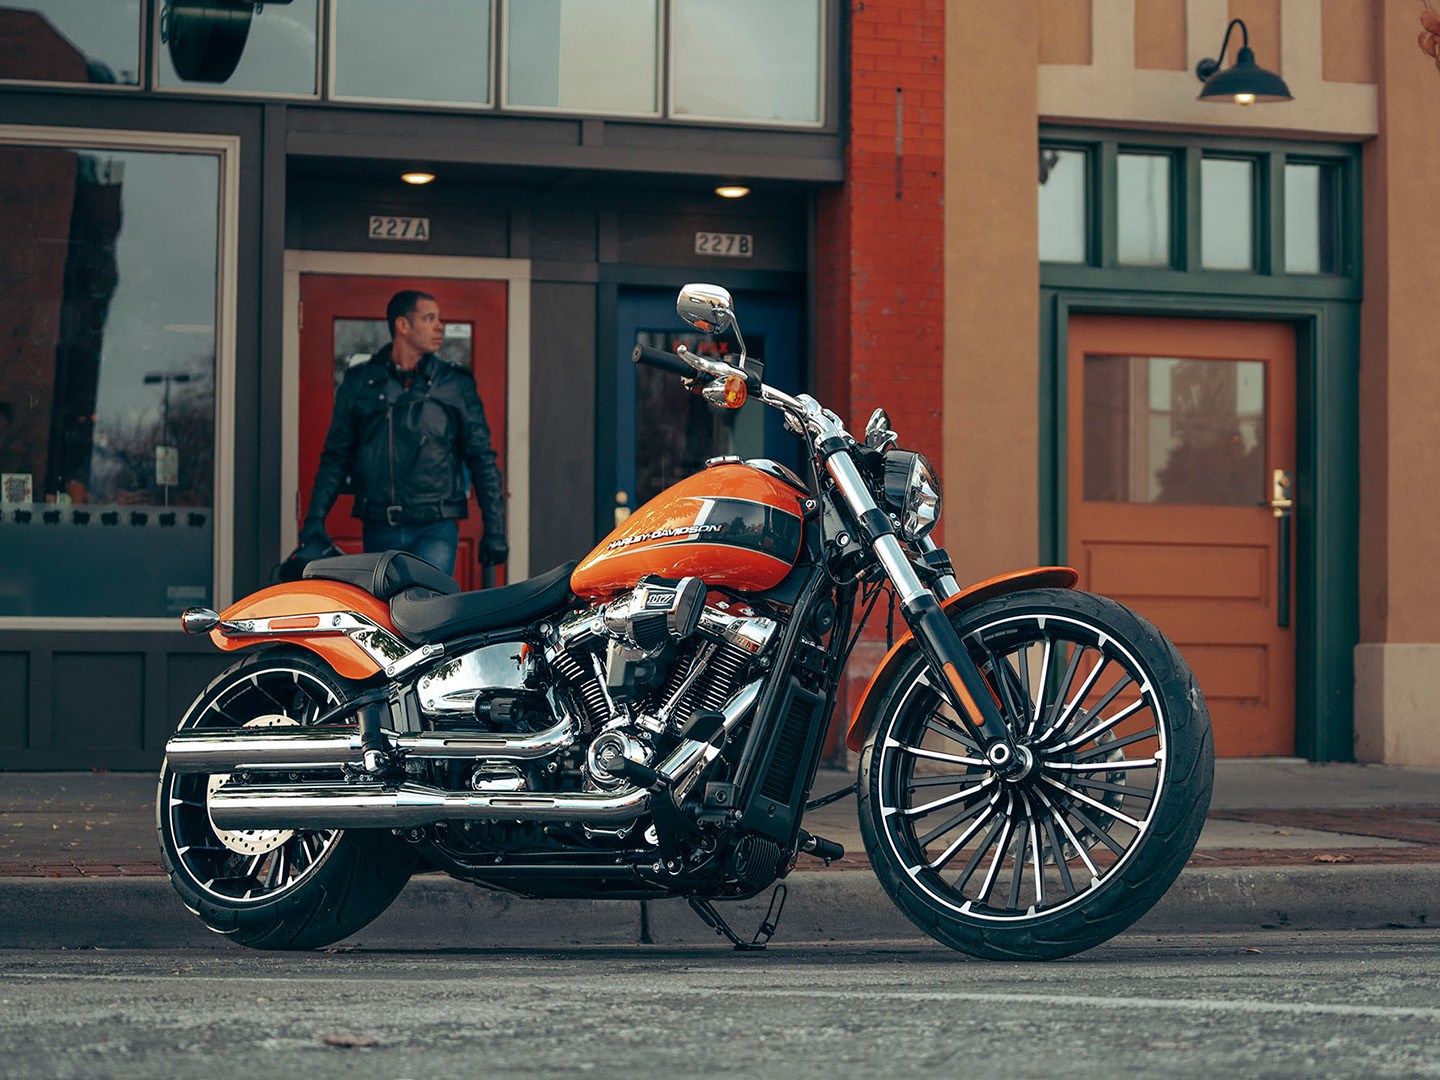 2023 Harley-Davidson Breakout® in Franklin, Tennessee - Photo 4